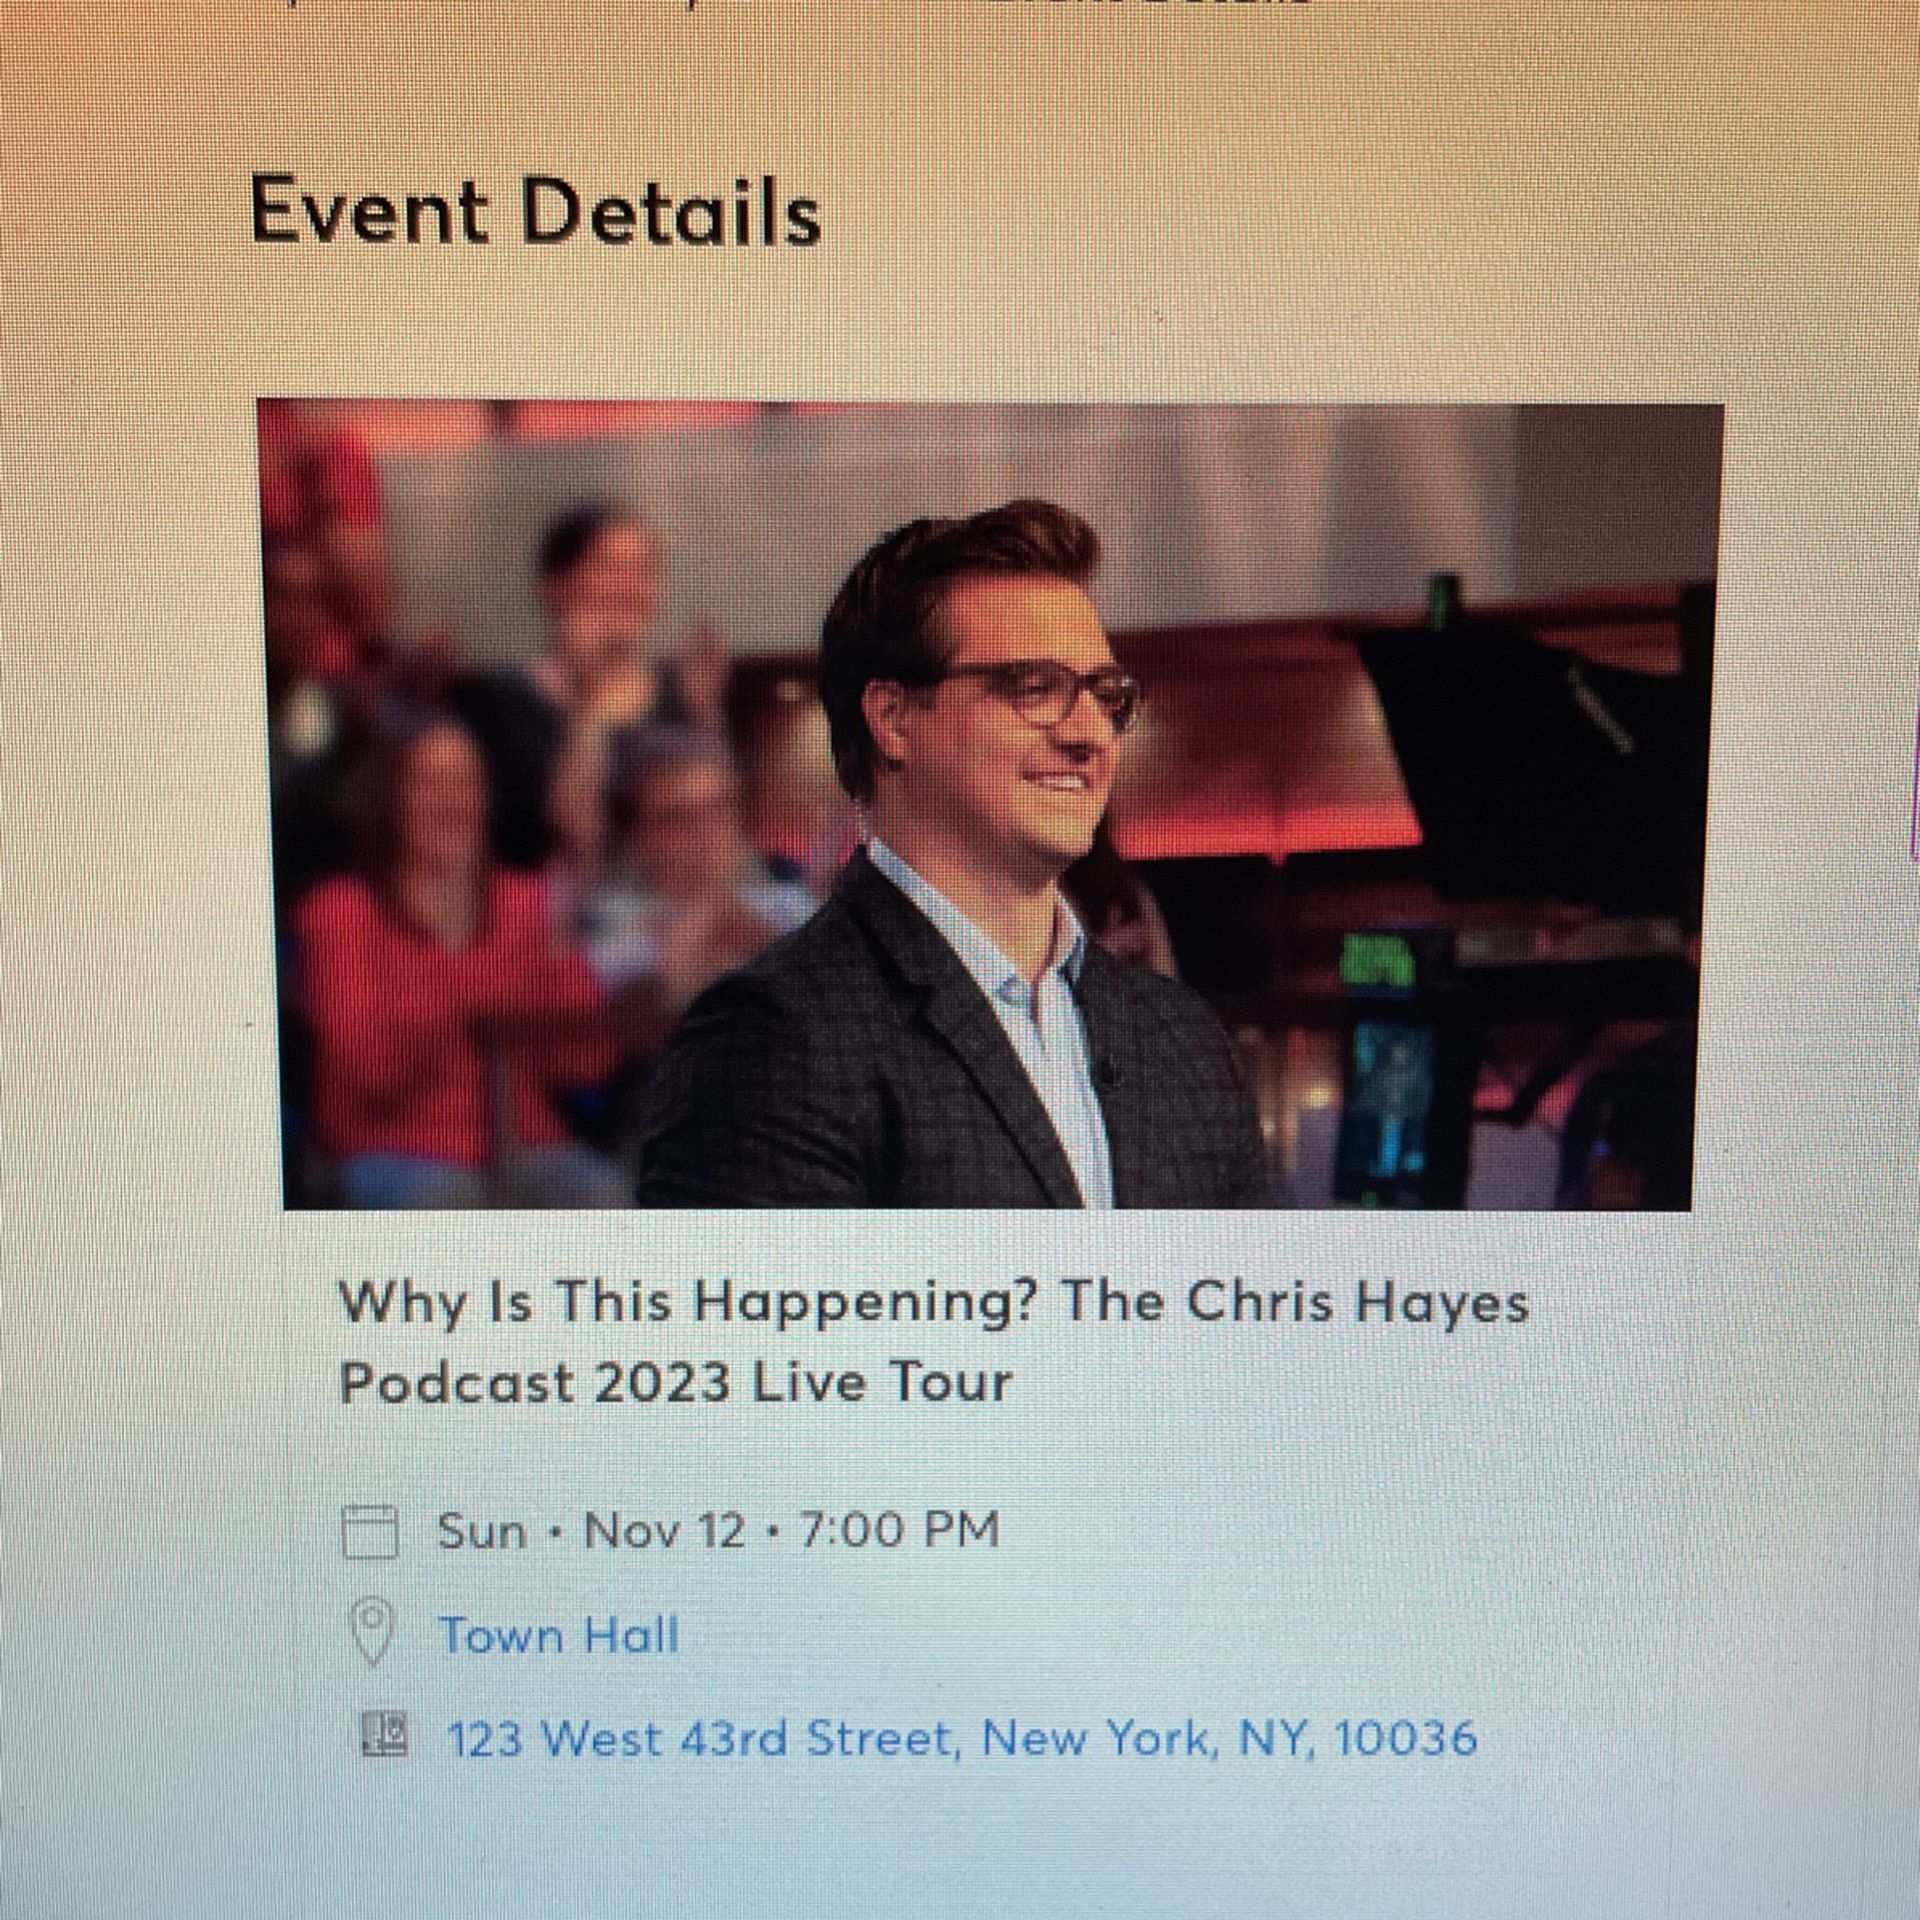 RACHEL MADDOW Why Is This Happening? The Chris Hayes Podcast Live Tour